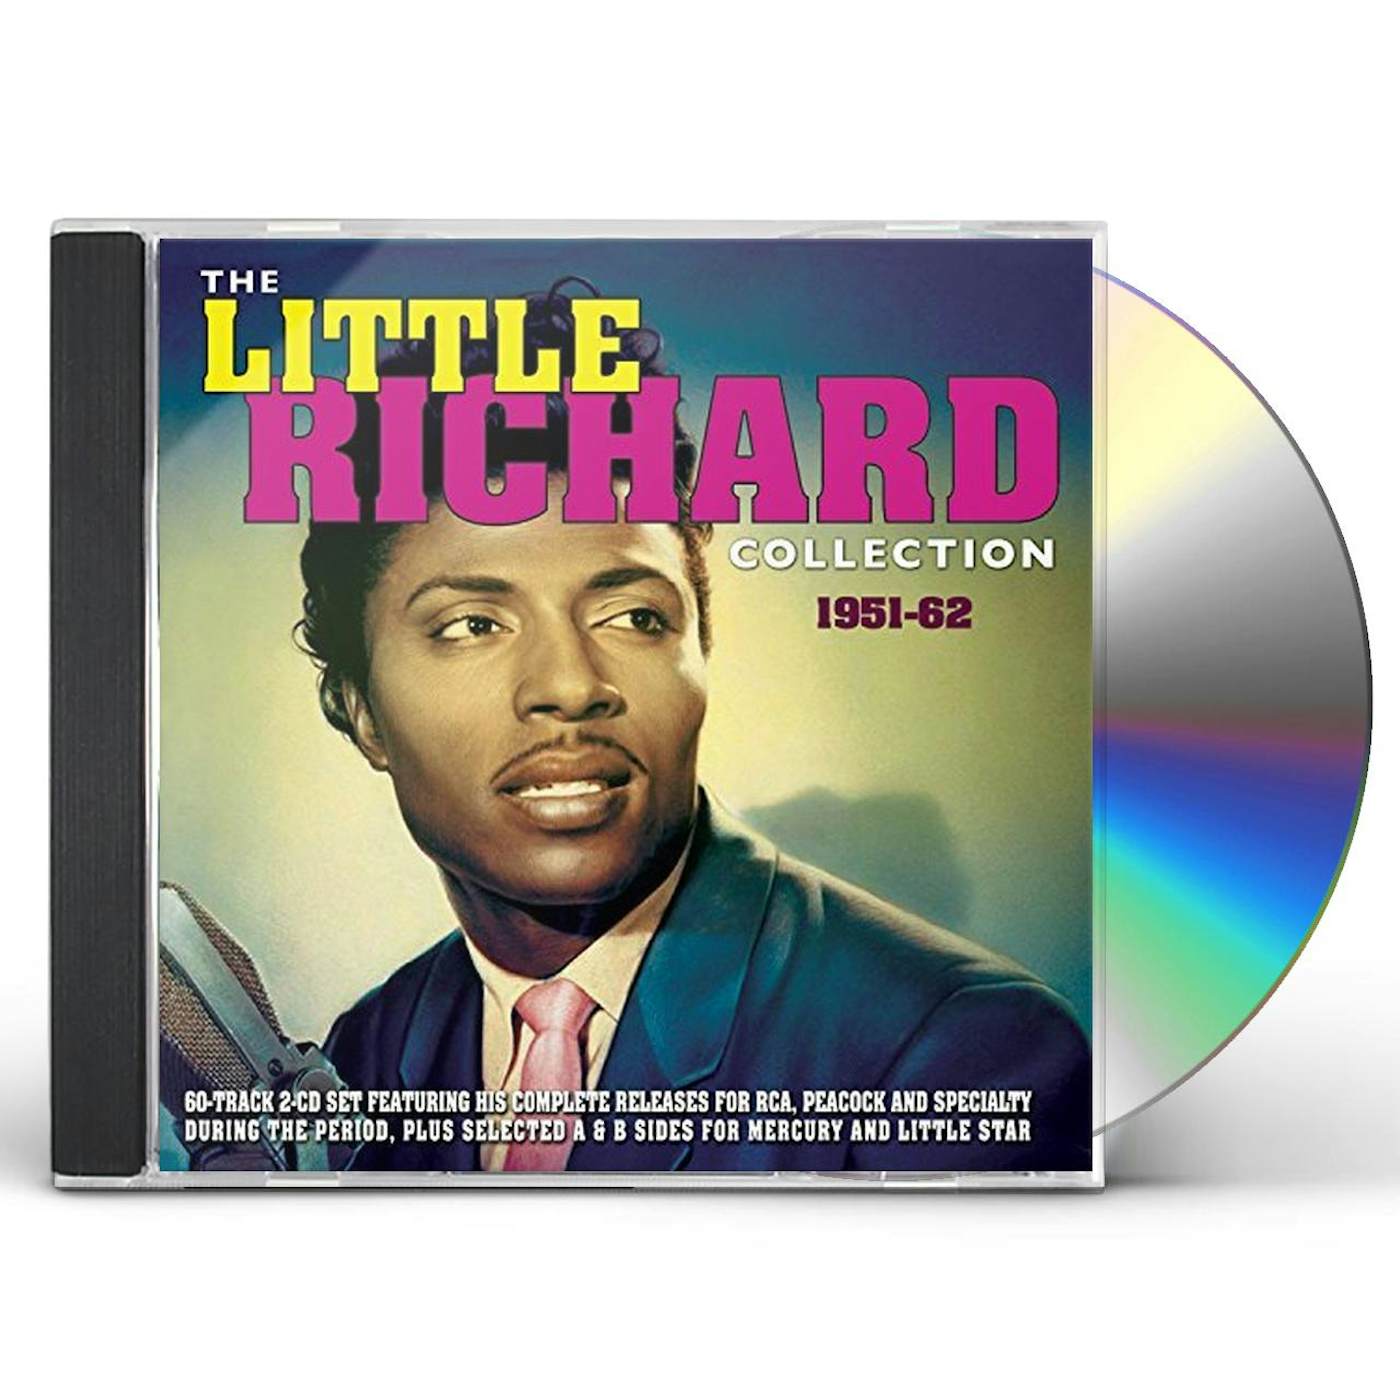 Little Richard COLLECTION 1951-62 CD